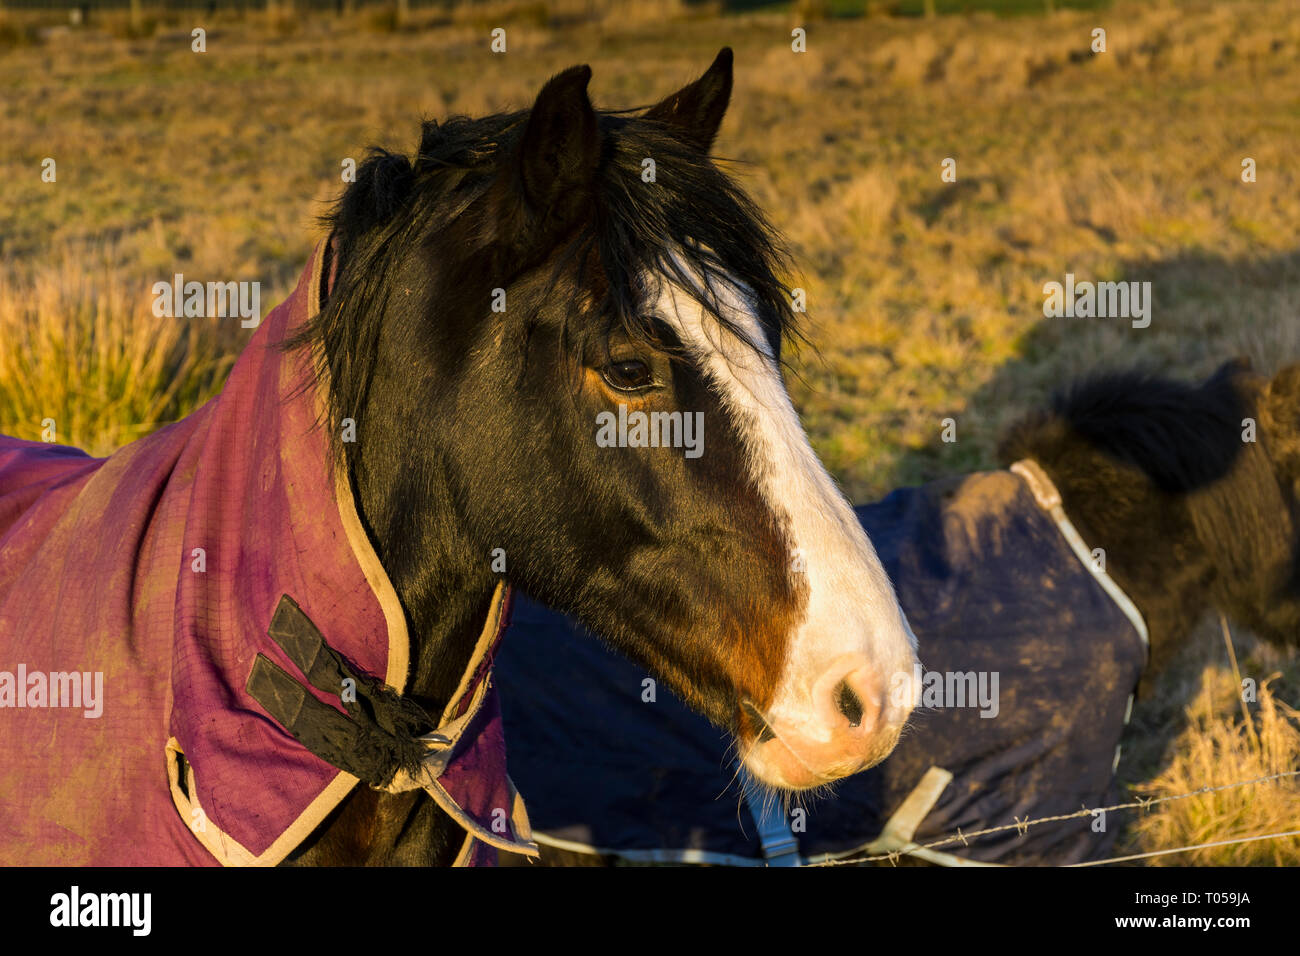 A horse in a field near Scarfskerry, Caithness, Scotland, UK Stock Photo